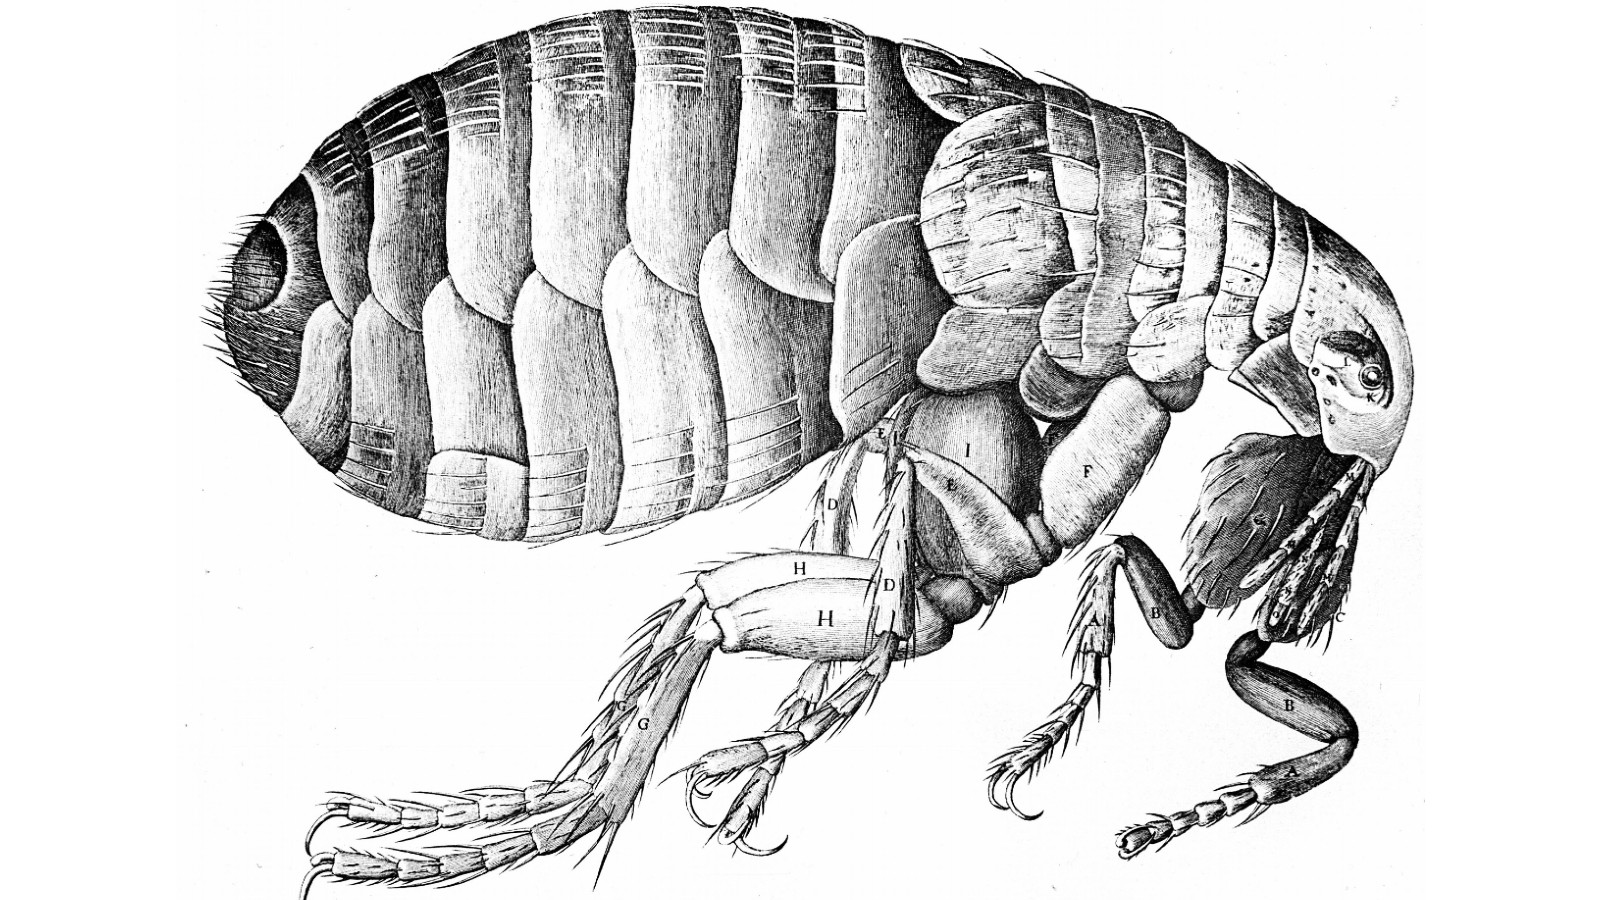 A microscopic engraving of a flea by English scientist Robert Hooke (1635-1703) in 1665. Fleas transmitted the plague